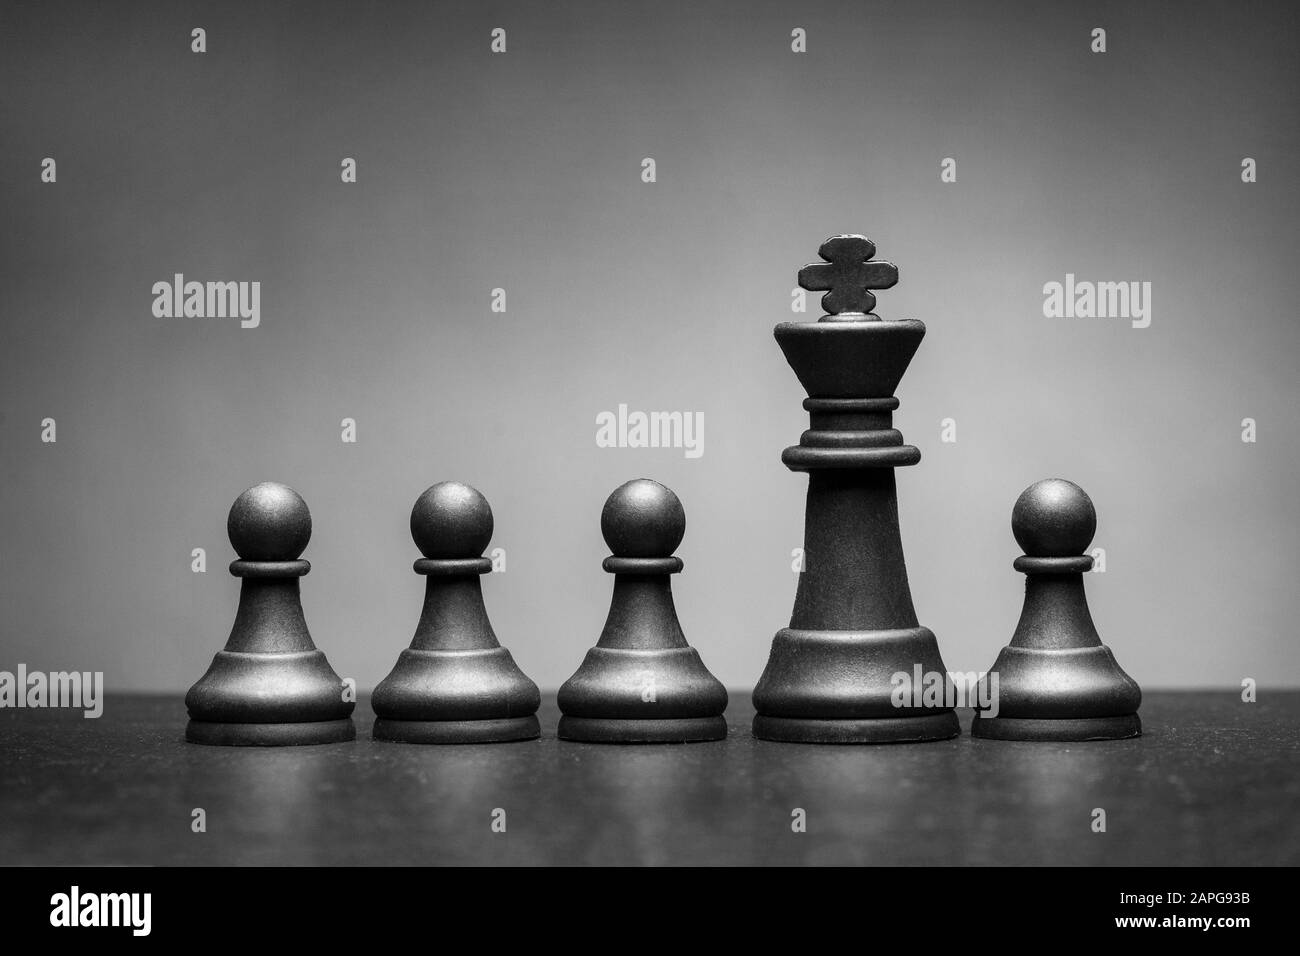 Black king chess piece with four pawns Stock Photo